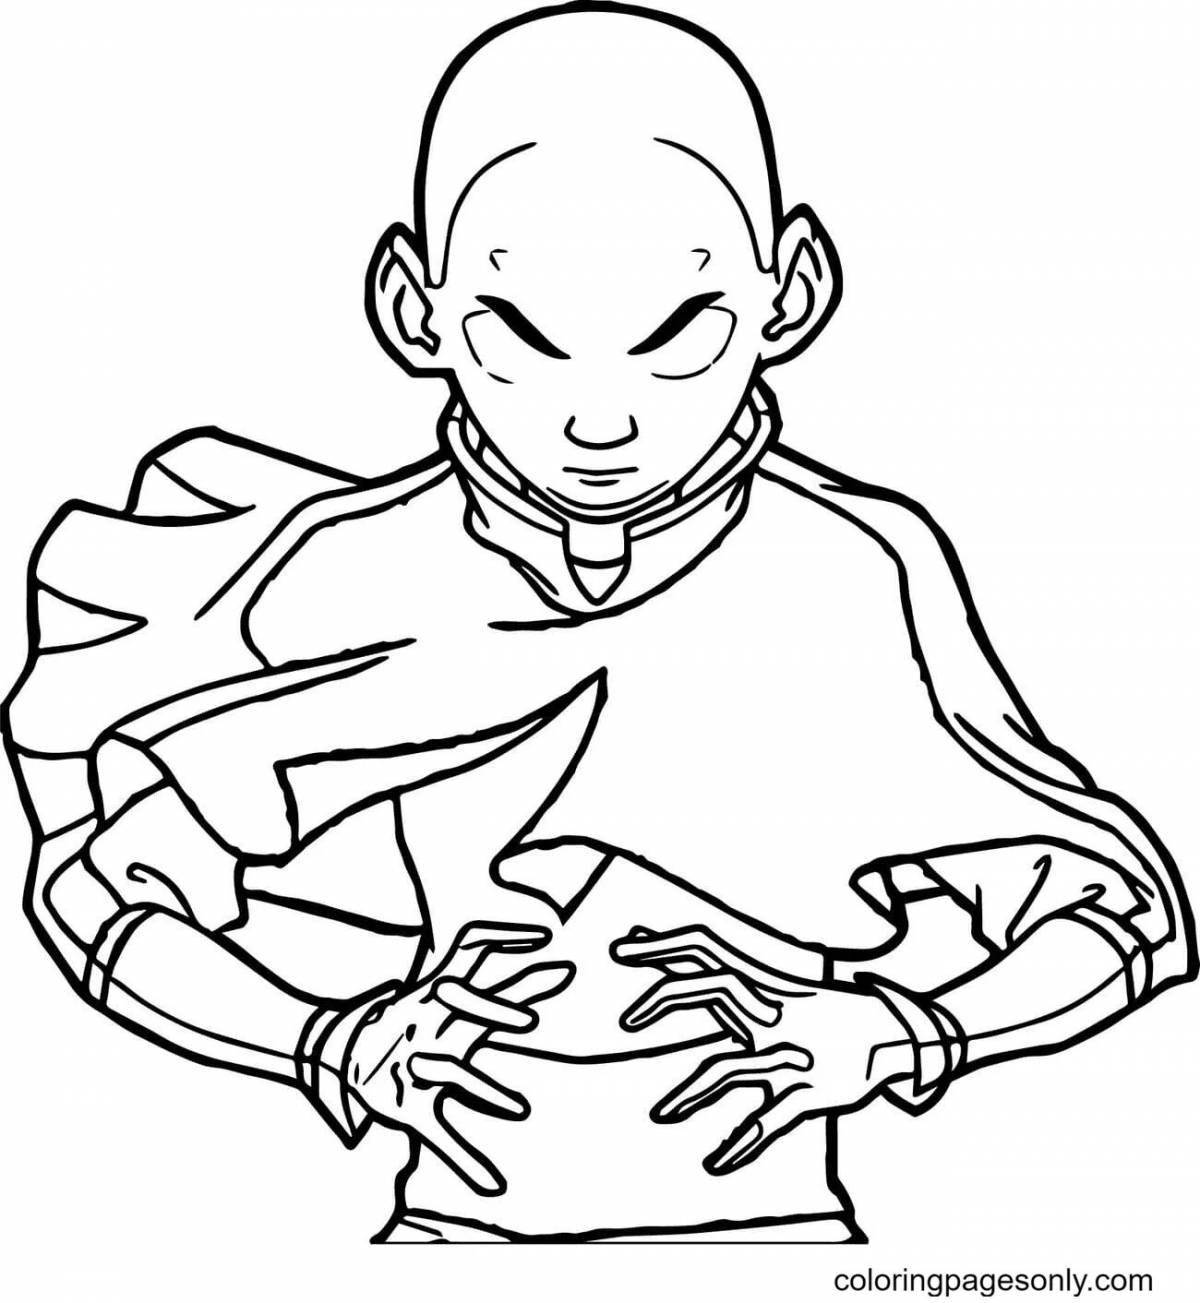 Aang funny avatar coloring book